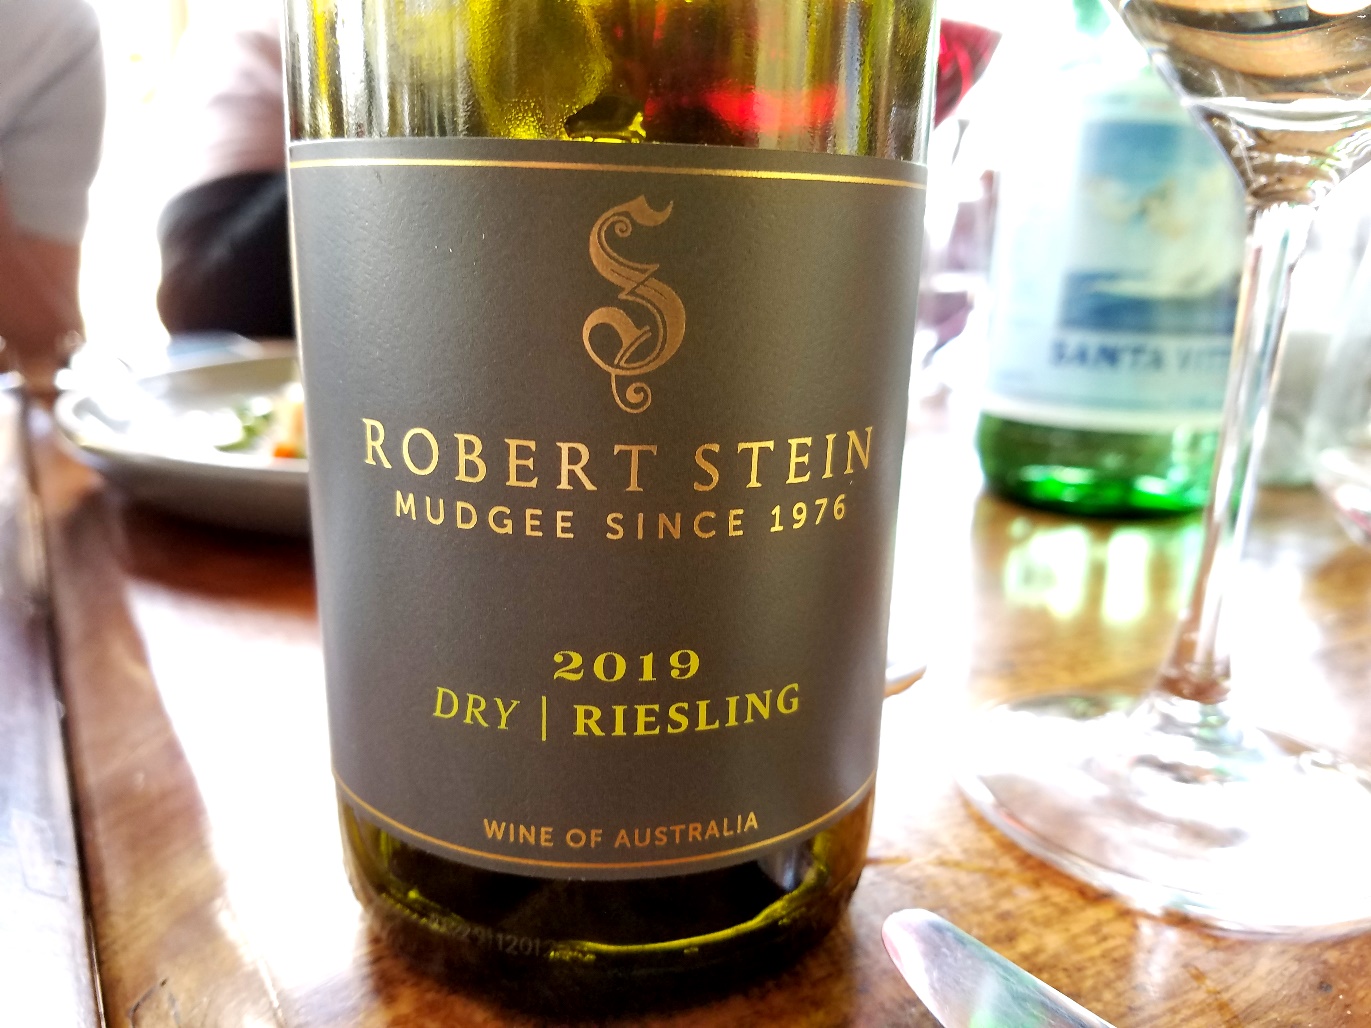 Robert Stein, Dry Riesling 2019, Mudgee, New South Wales, Australia, Wine Casual